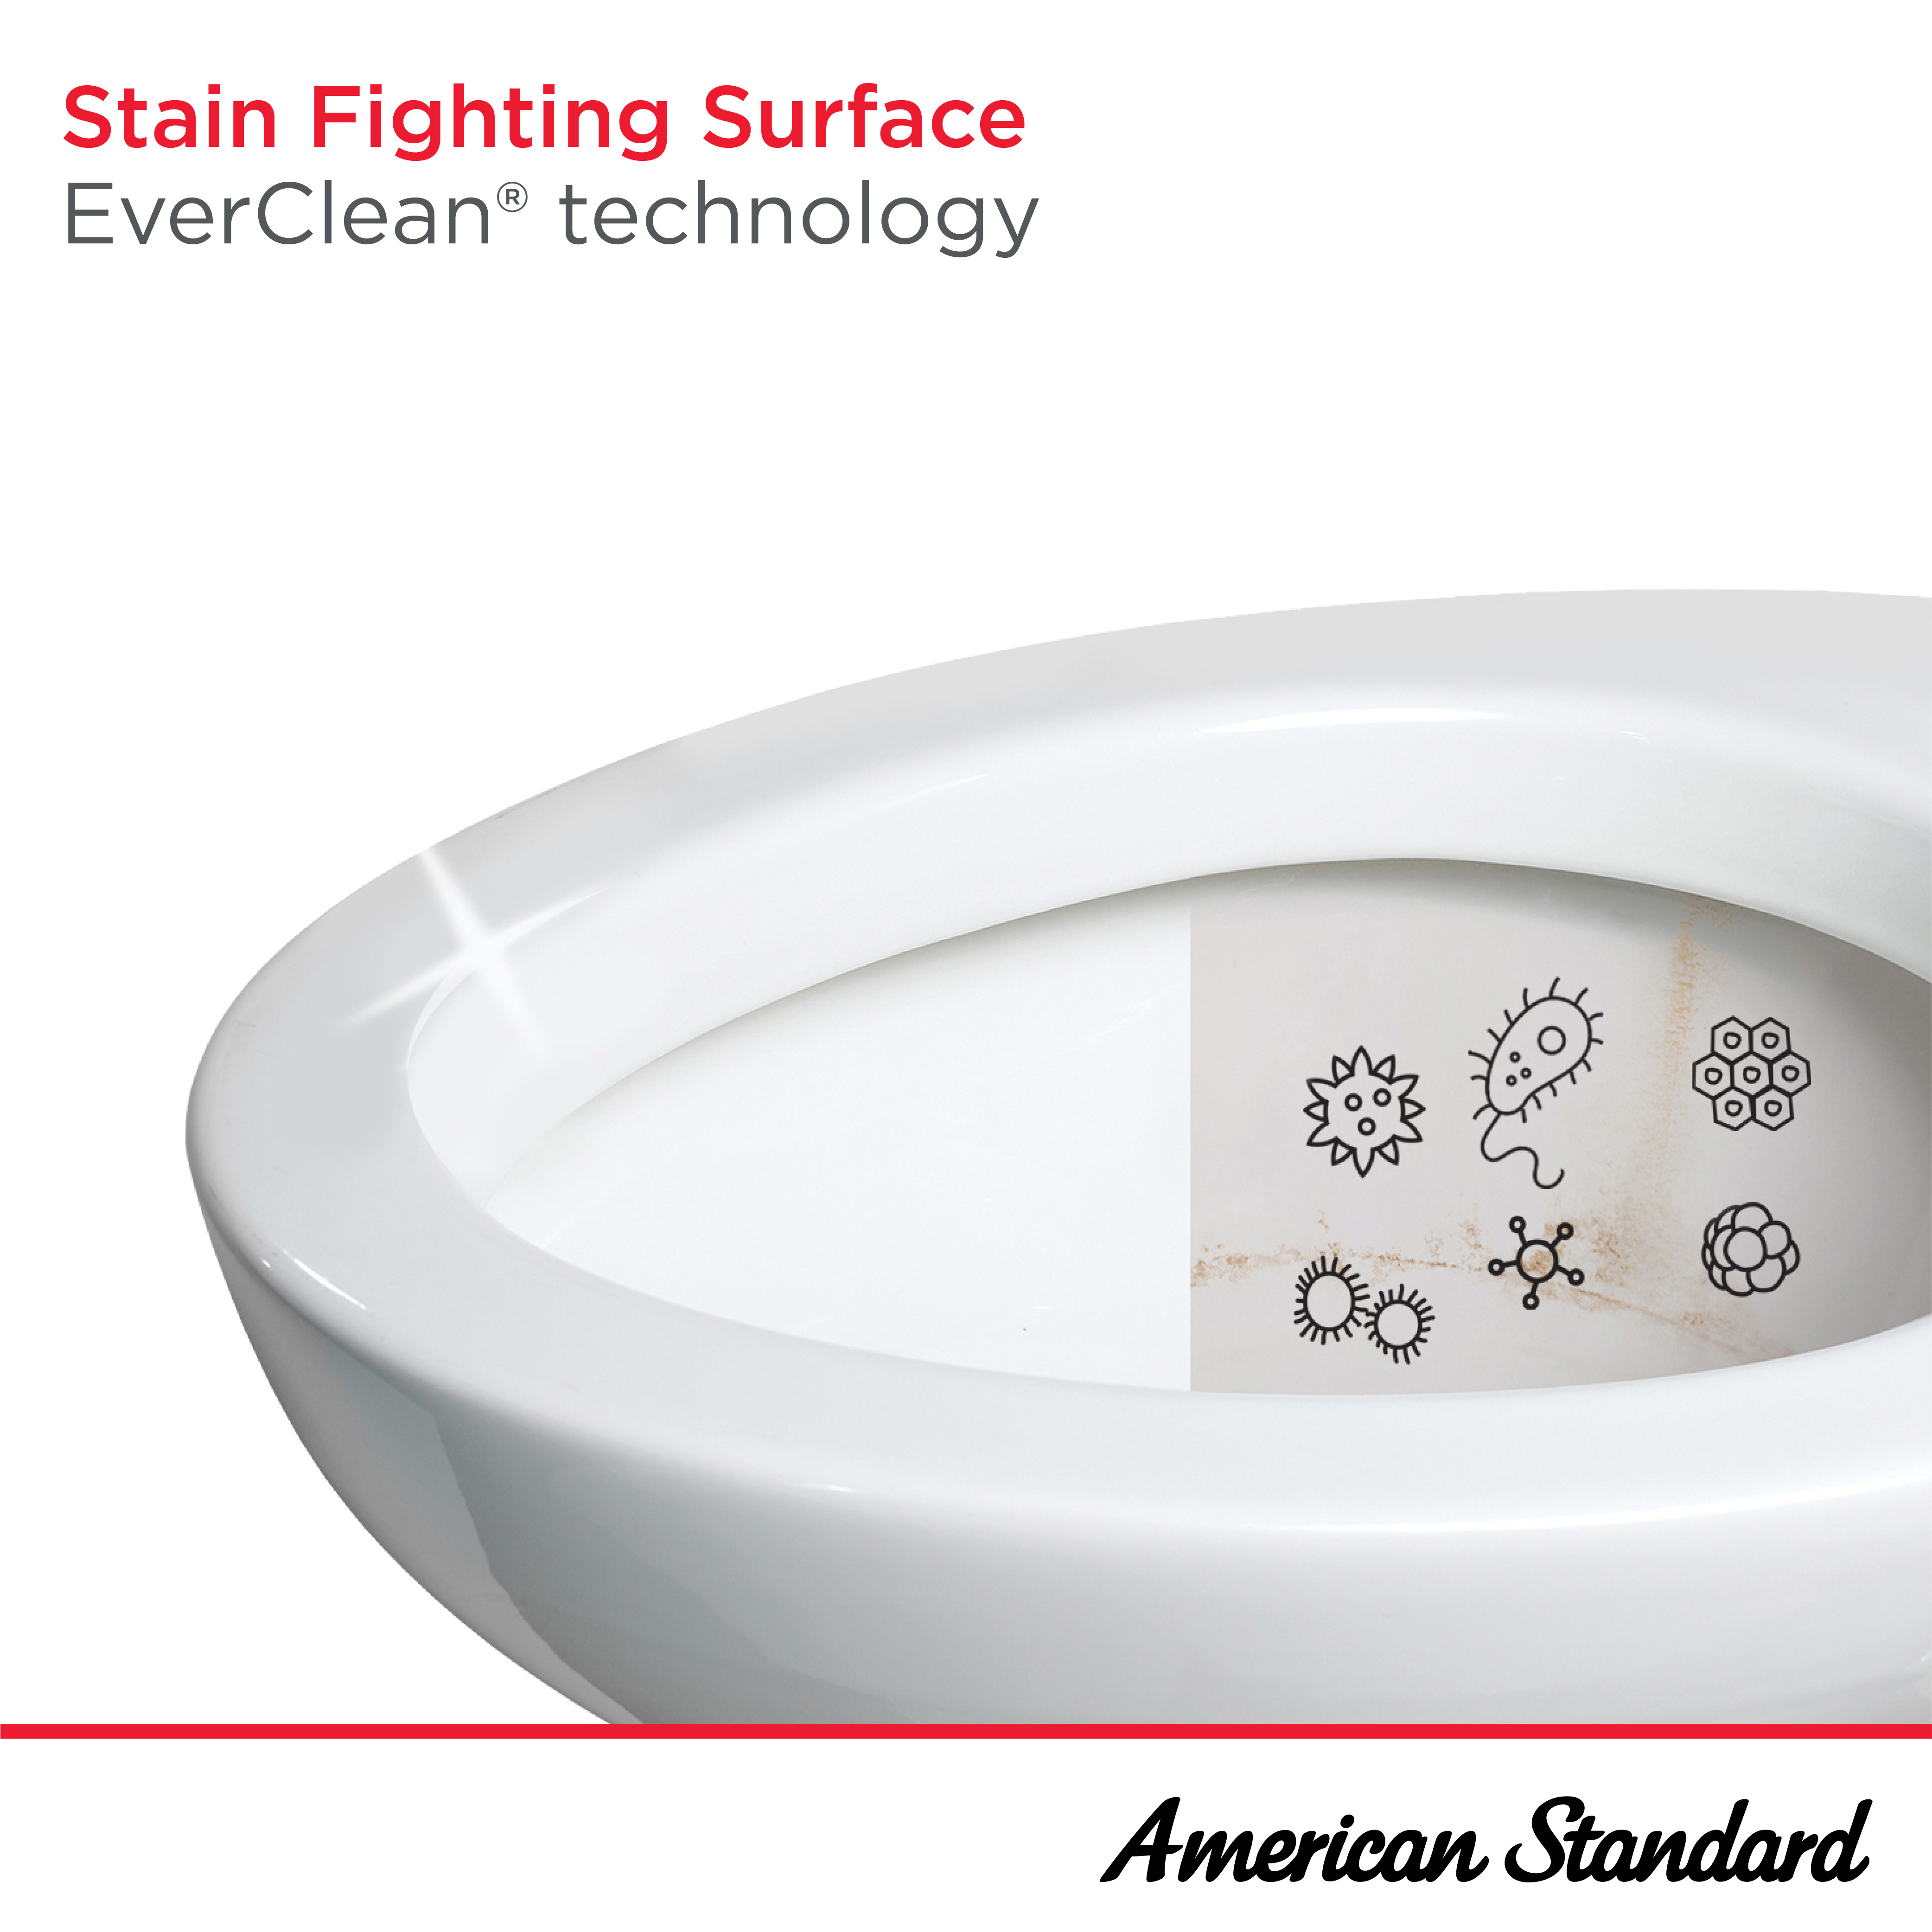 Portsmouth™ Champion™ PRO Two-Piece 1.28 gpf/4.8 Lpf Standard Height Elongated Toilet Less Seat